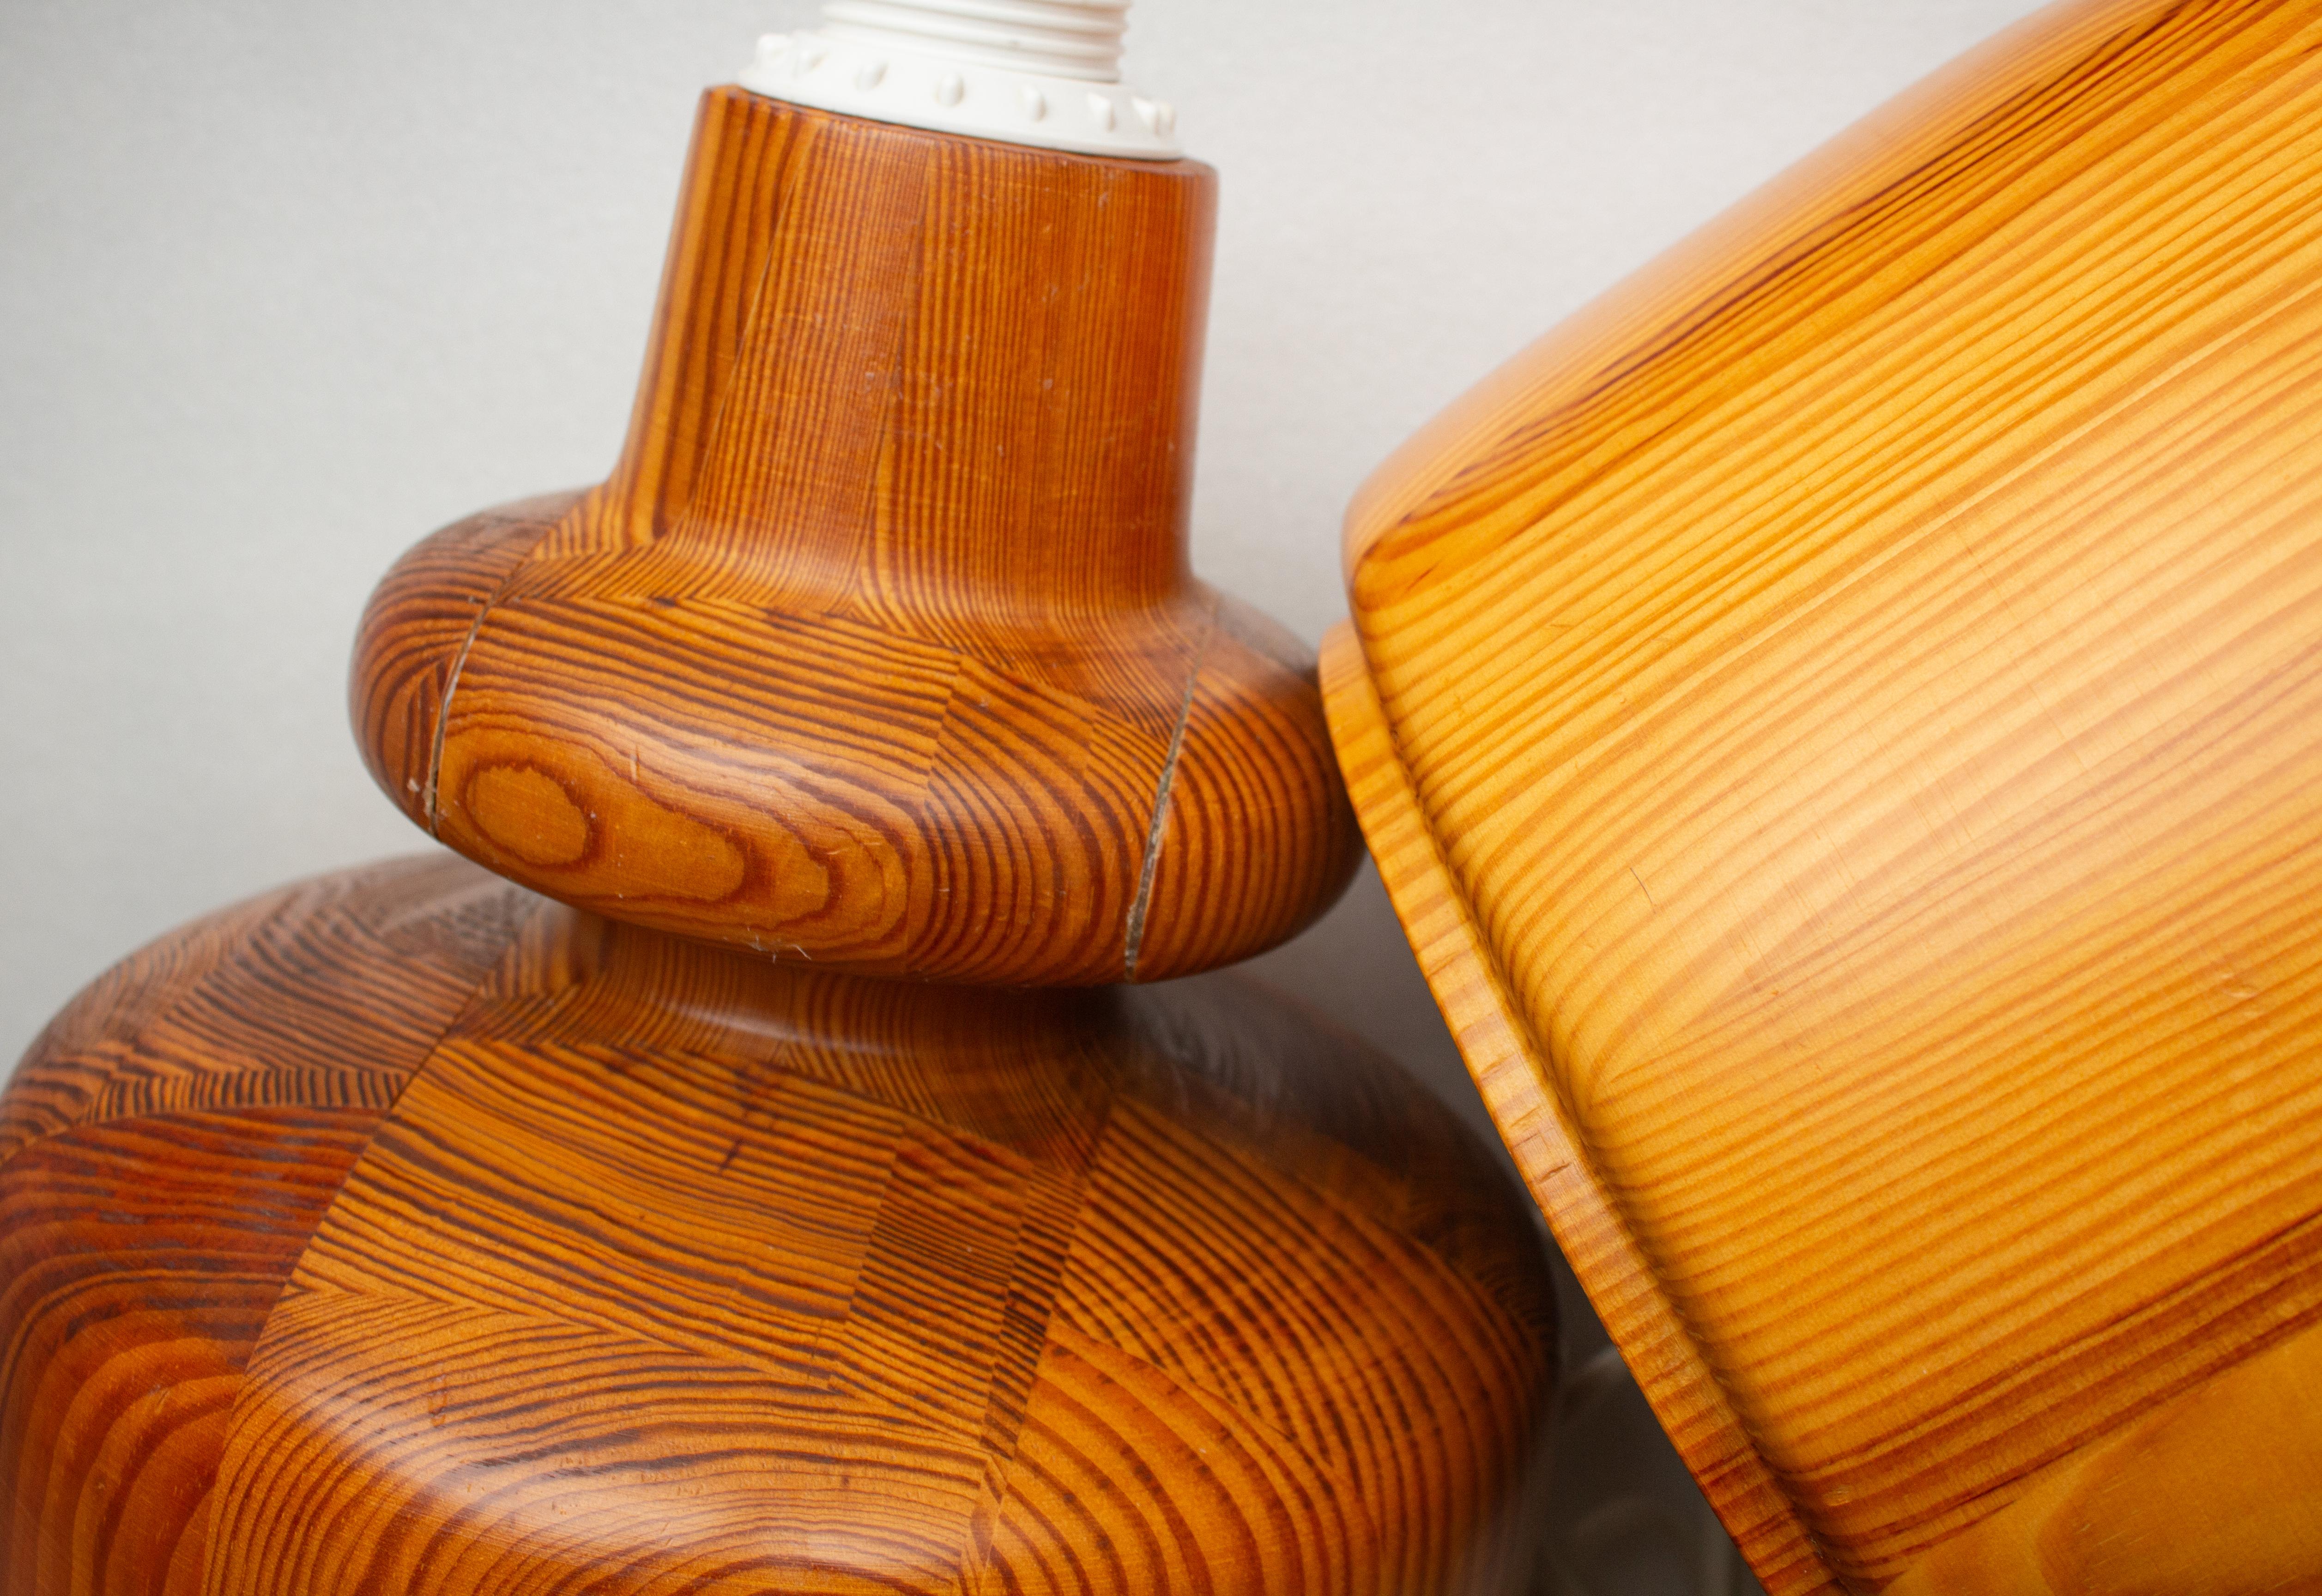 A Pair of Table Lamps in Solid Pine from Sweden, 1970s For Sale 1